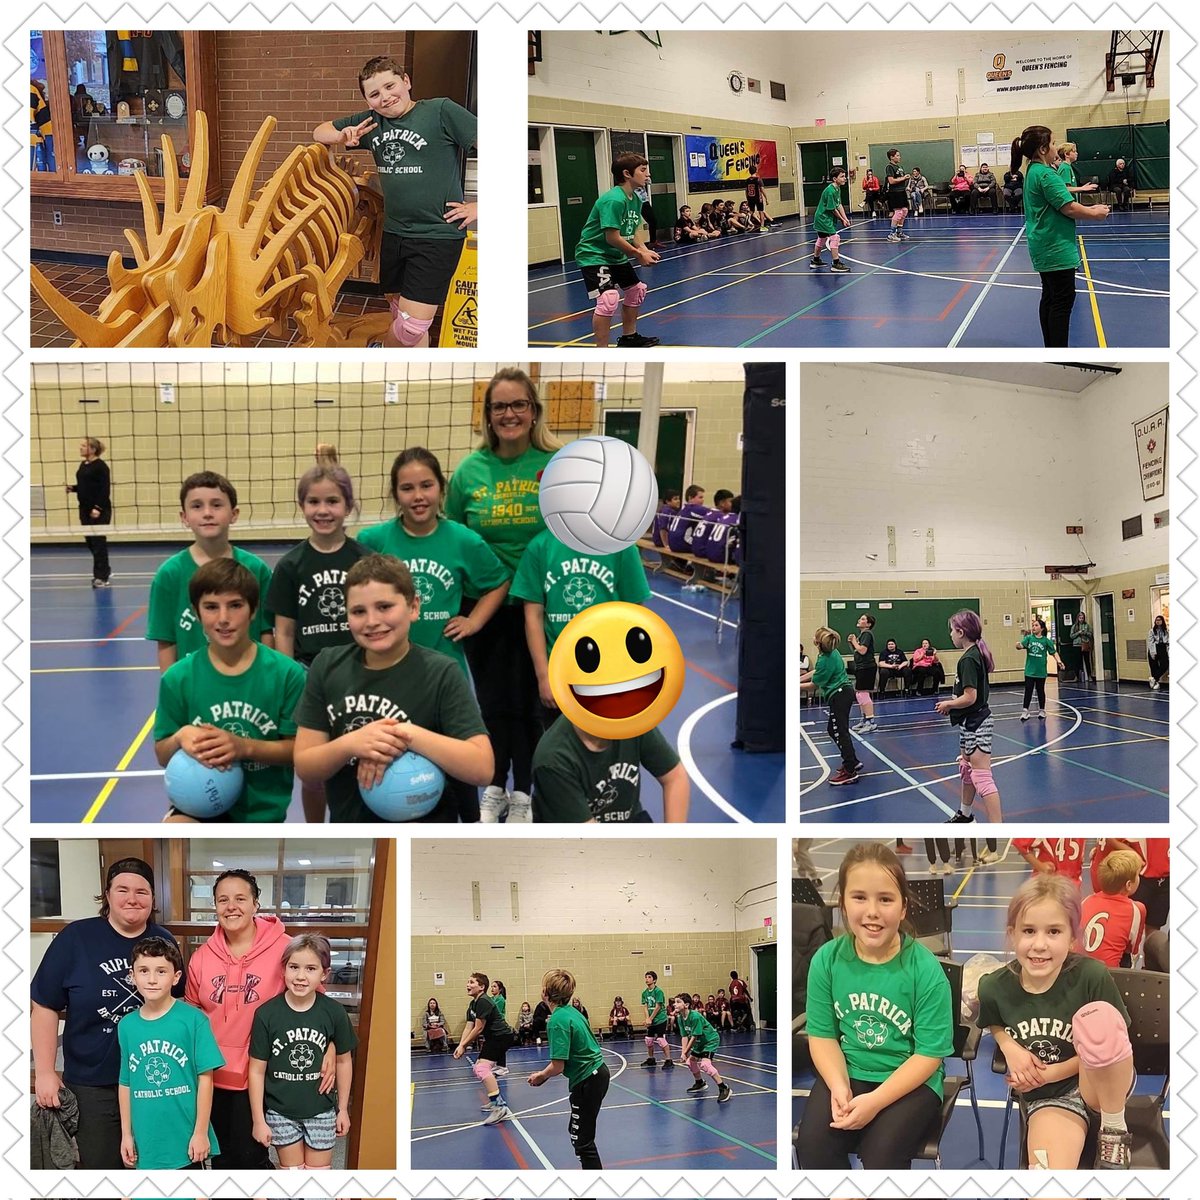 Lots of smiles and a fun day! Our first Jr. boys volleyball team for St.Patrick's, with a couple games won and great improvement throughout the day. They were proud of their efforts! Well done team!!! 🏐 @alcdsb_stpe